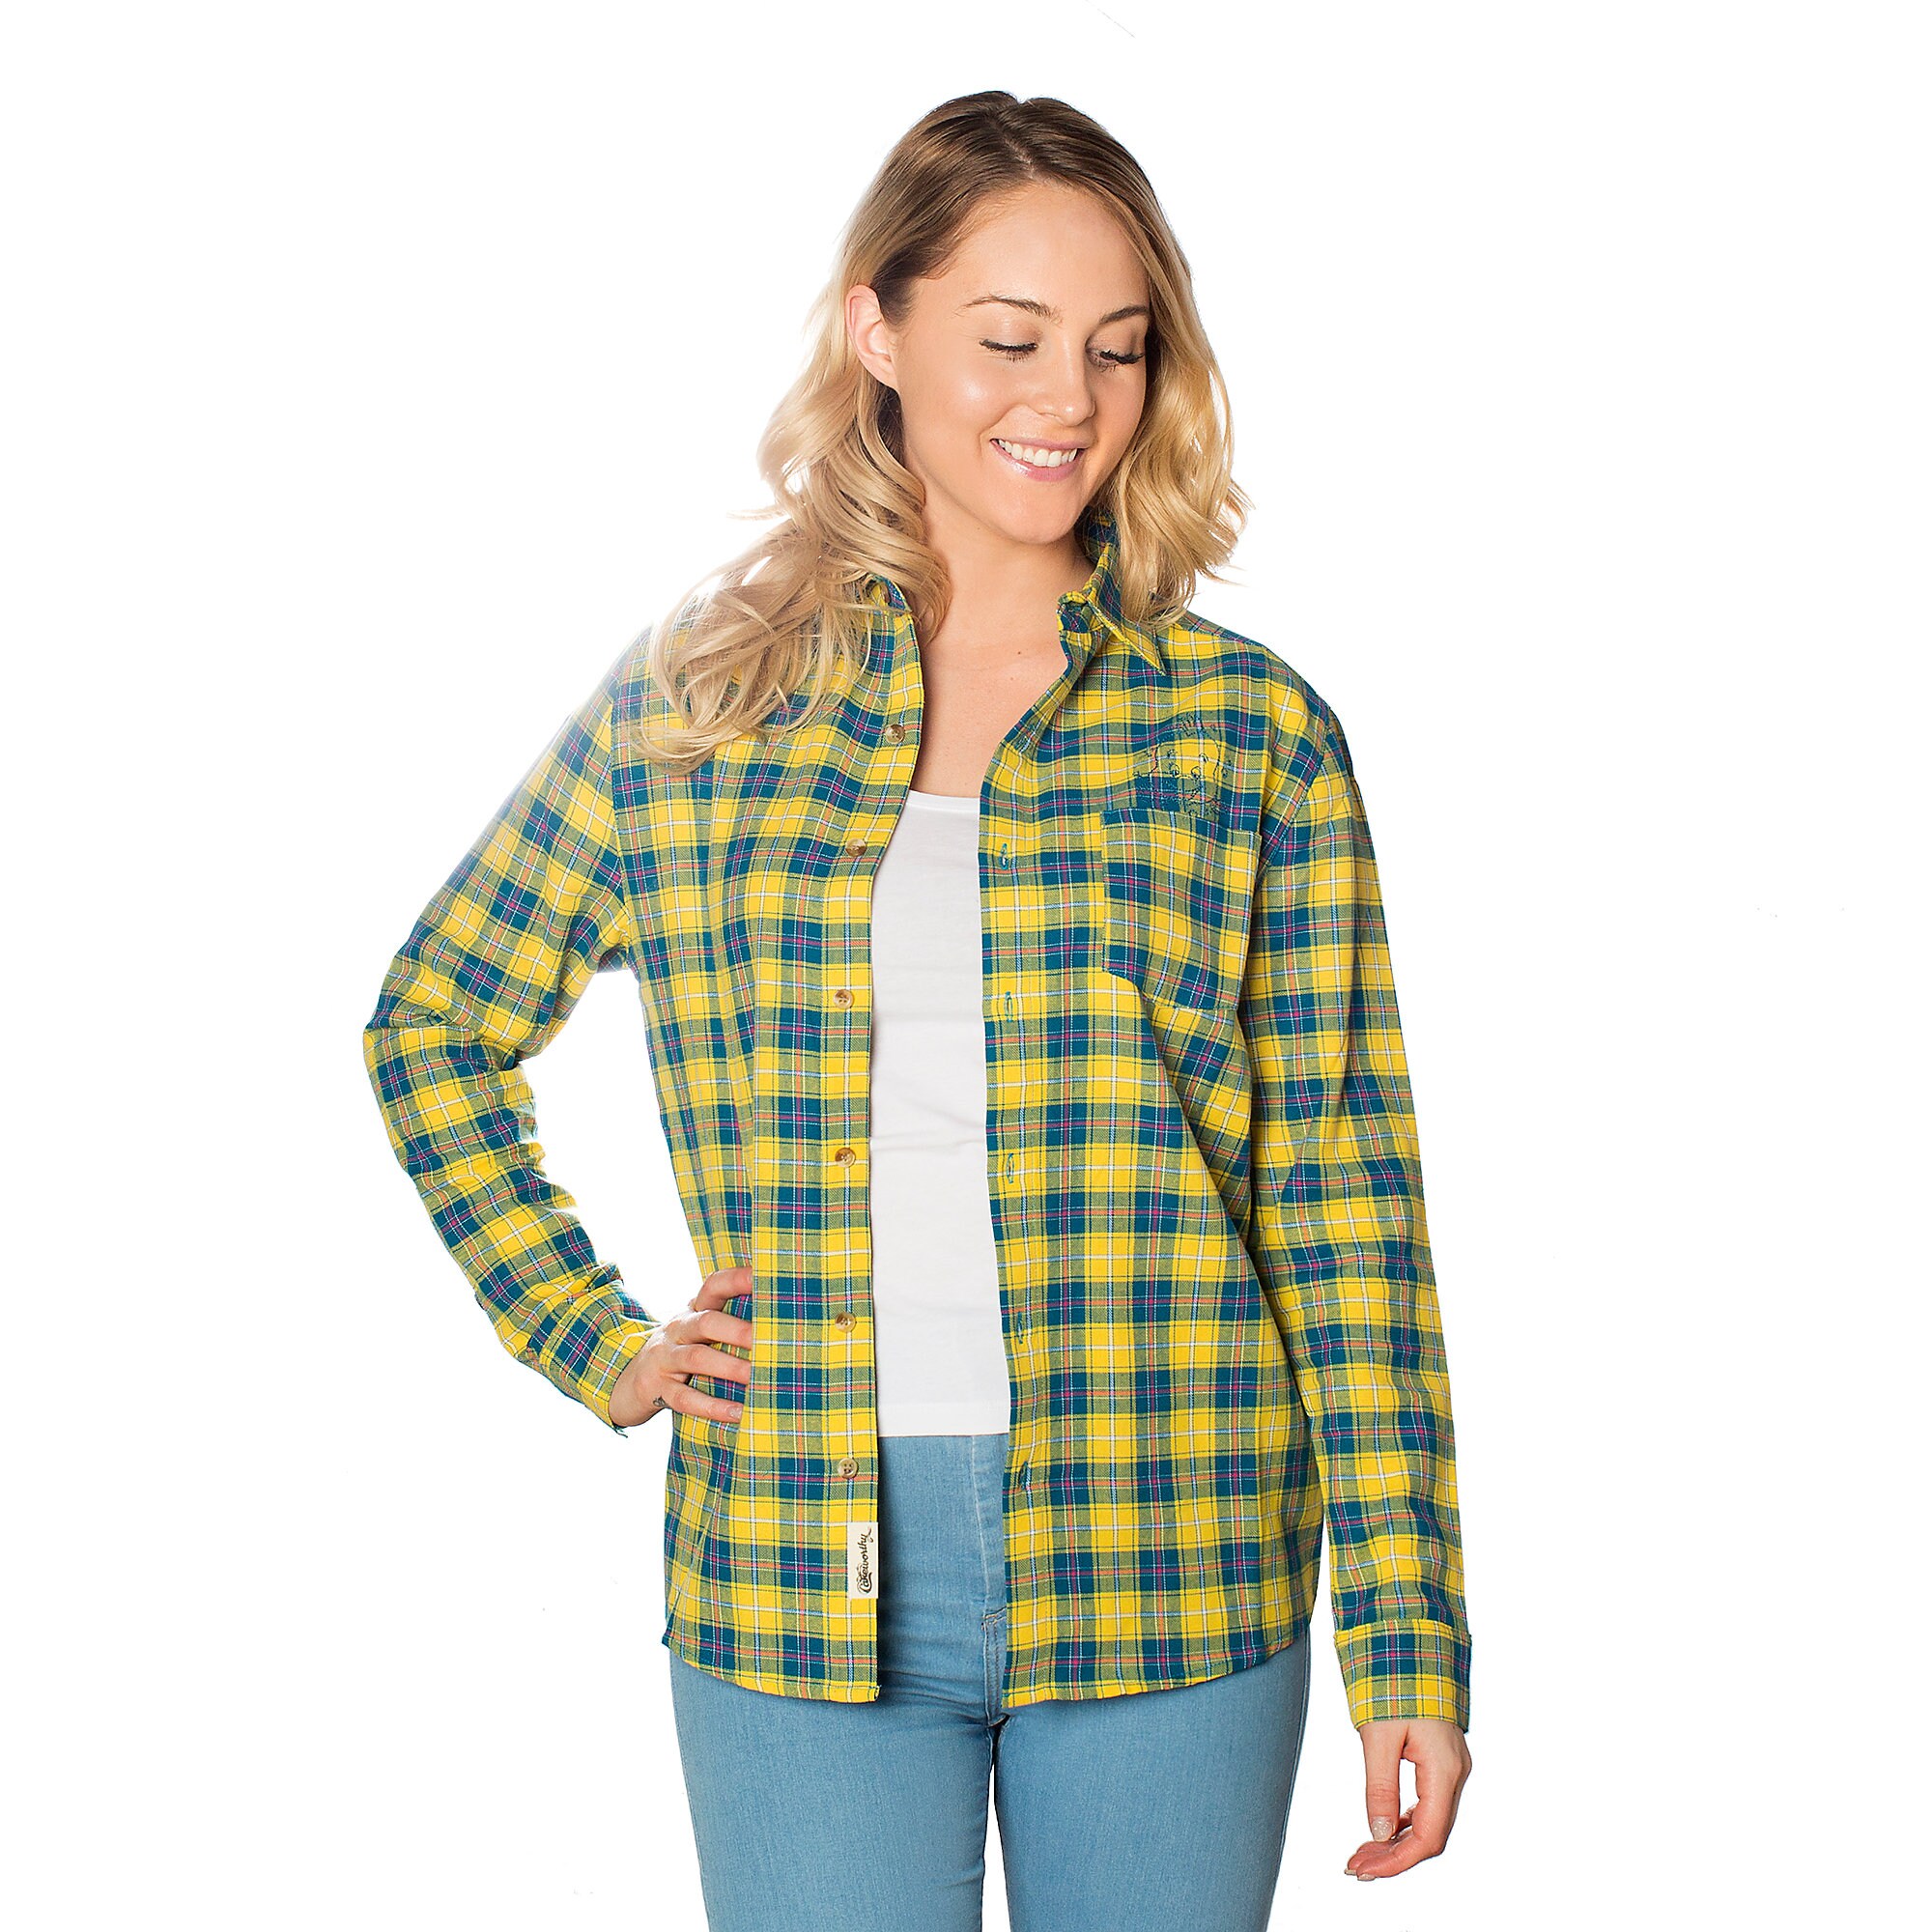 Flounder Flannel Shirt for Adults by Cakeworthy - The Little Mermaid